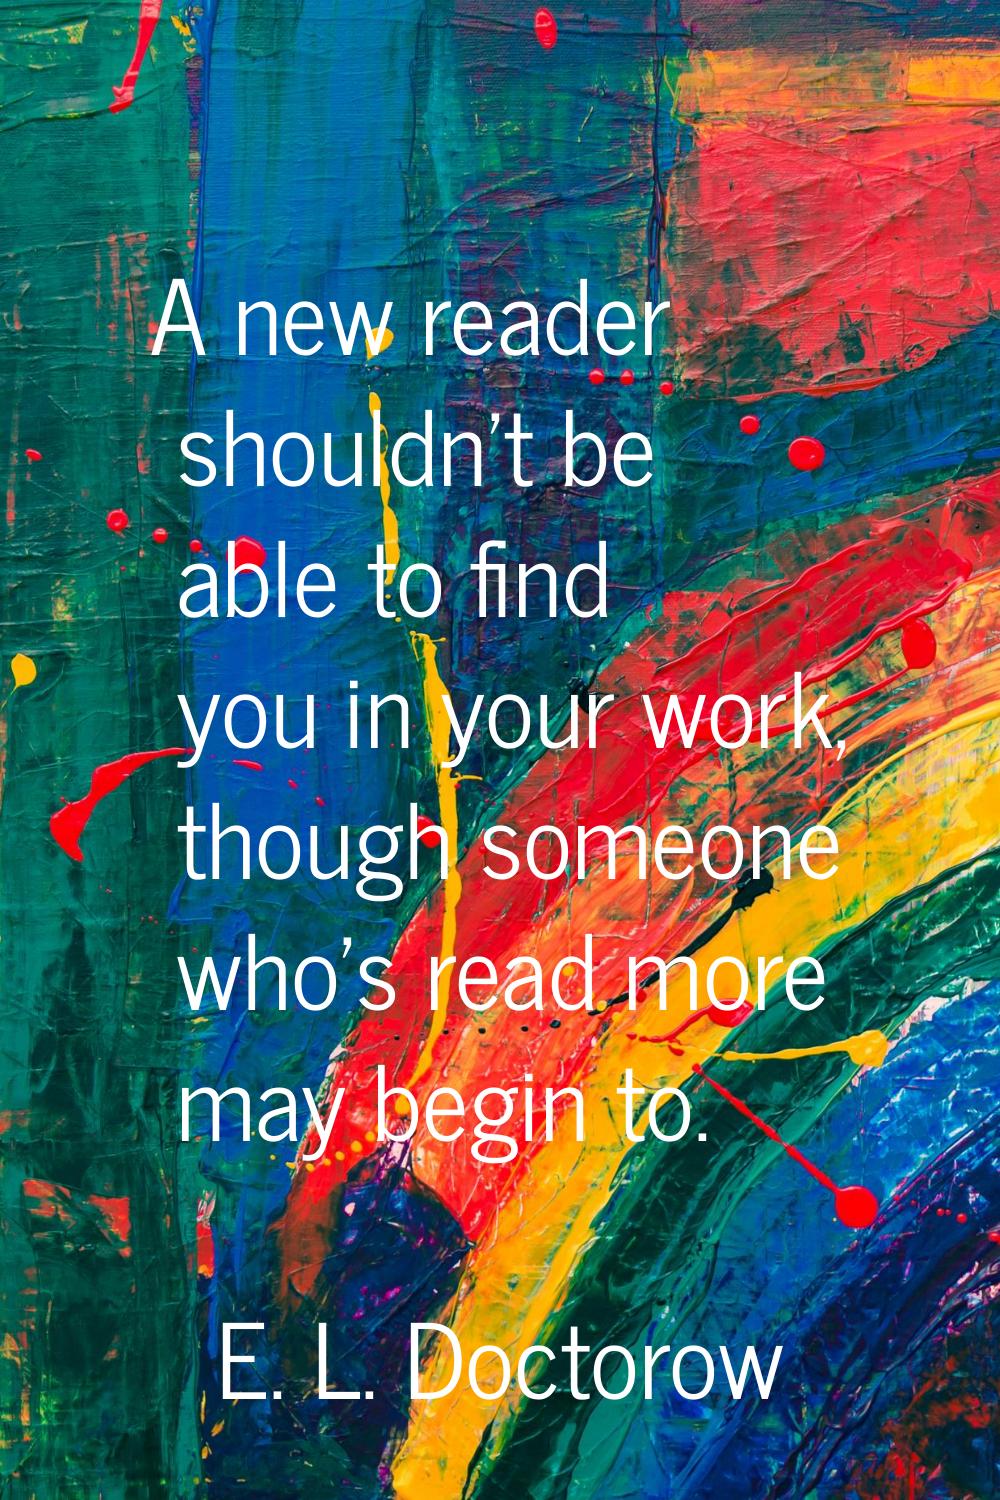 A new reader shouldn't be able to find you in your work, though someone who's read more may begin t